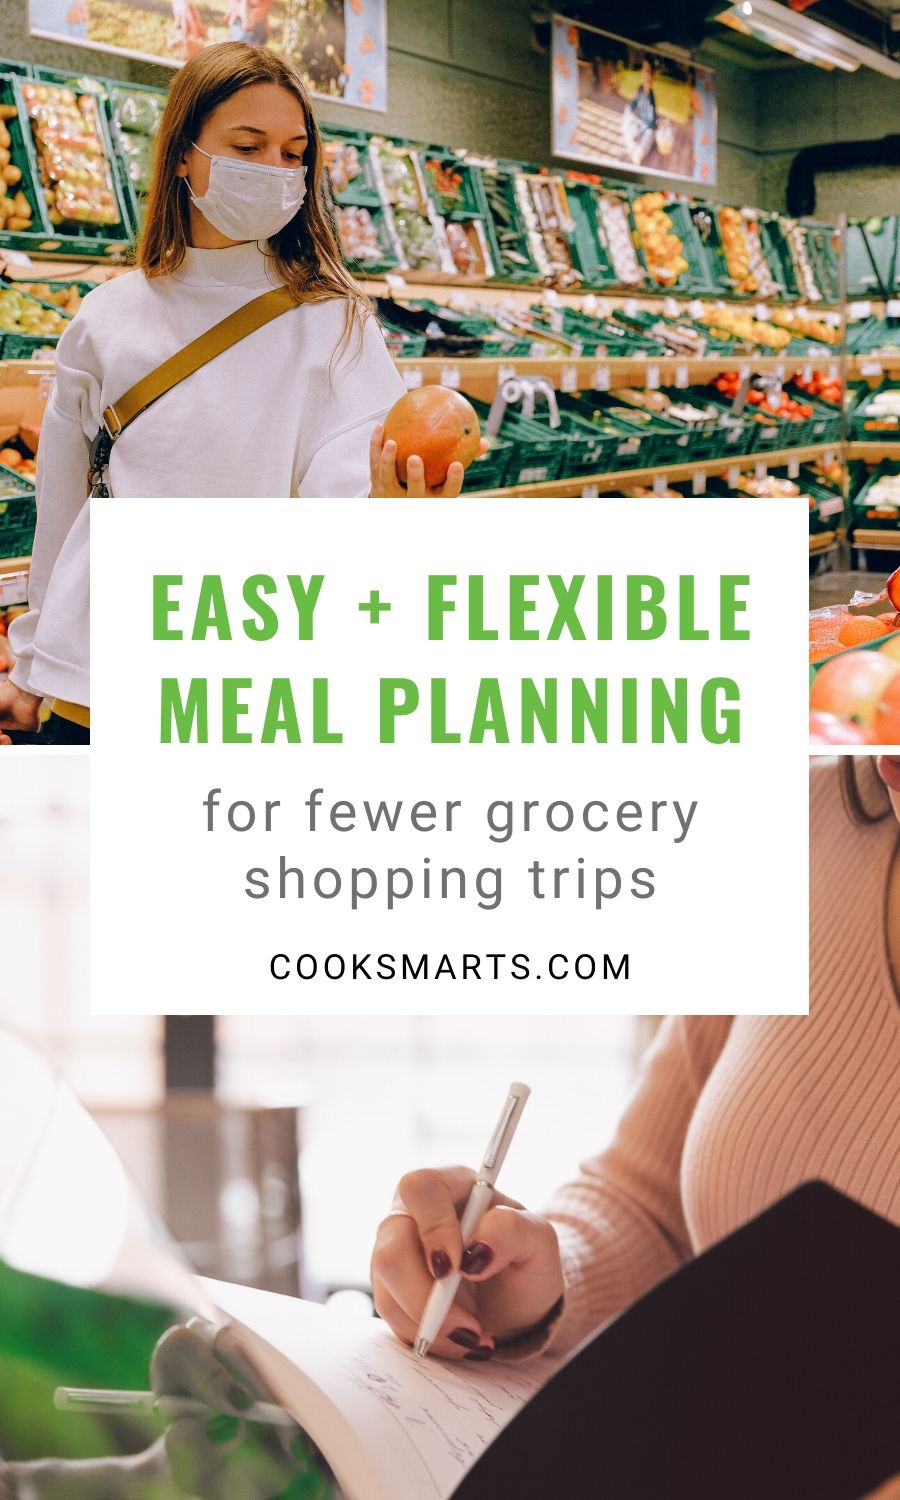 The Easiest, Most Flexible Way to Meal Plan During Quarantine | Cook Smarts